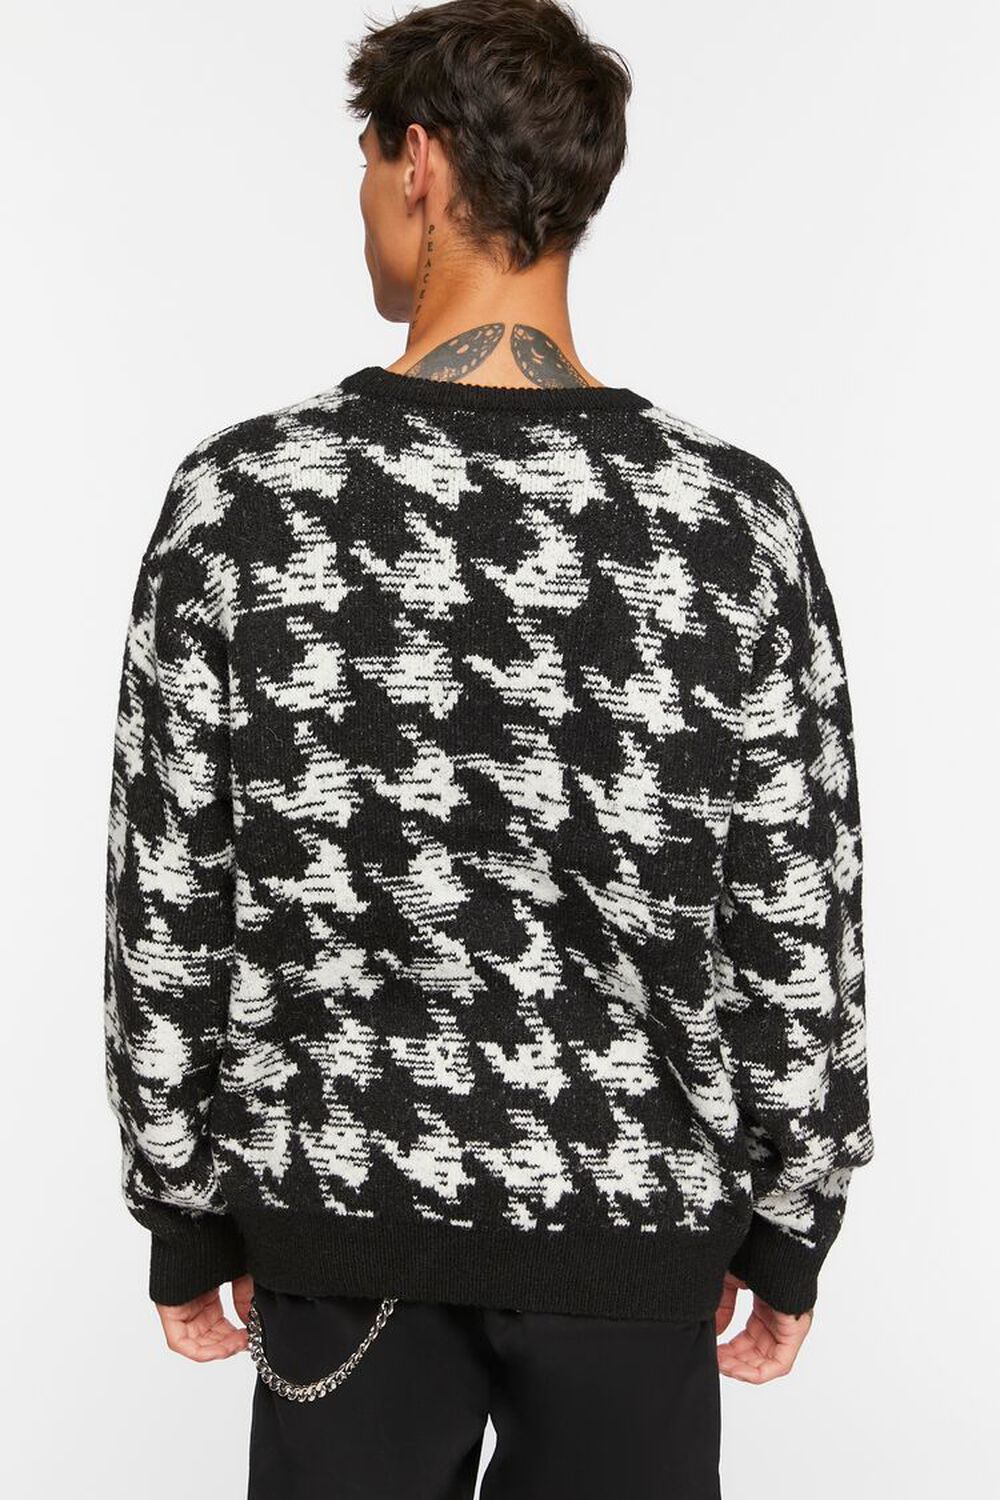 BLACK/WHITE Houndstooth Drop-Sleeve Sweater, image 3